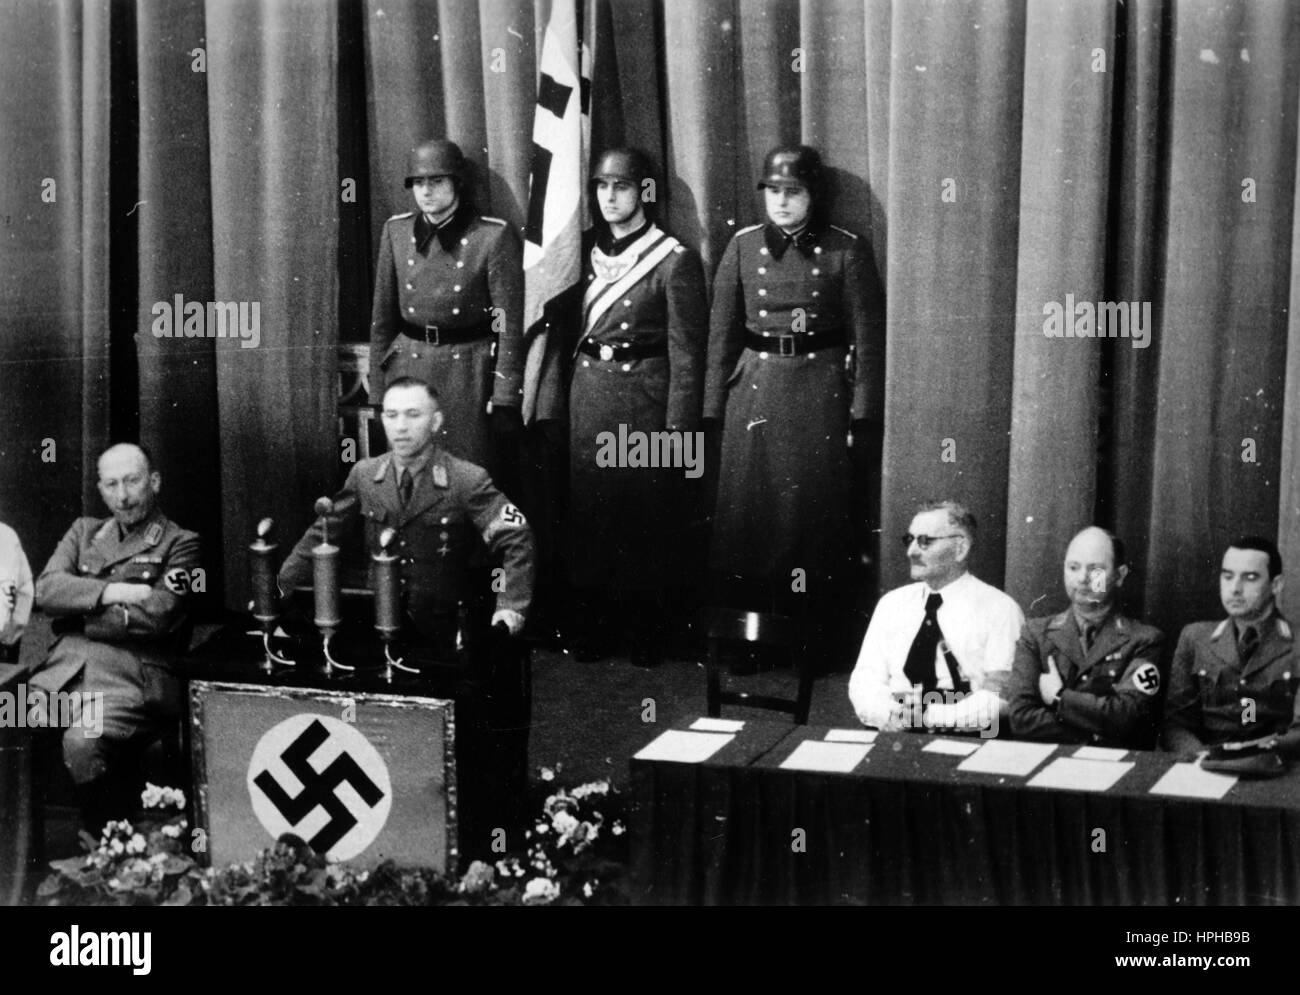 The Nazi propaganda period shows the Chief of Civil Affairs Gustav Simon during his address at a Volksdeutsche Bewegung (VdB) (German People's Movement) rally in Luxembourg (city) on 05.01.1941. The Nazi propaganda on the reverse of the movement reads, 'First roll call of the now more than 50,000 members of the German People's Movement takes place, at which the Chief of Civil Affairs, district leader Gustav Simon, gave the the rally crying.' Fotoarchiv für Zeitgeschichte - NO WIRE SERVICE - | usage worldwide Stock Photo